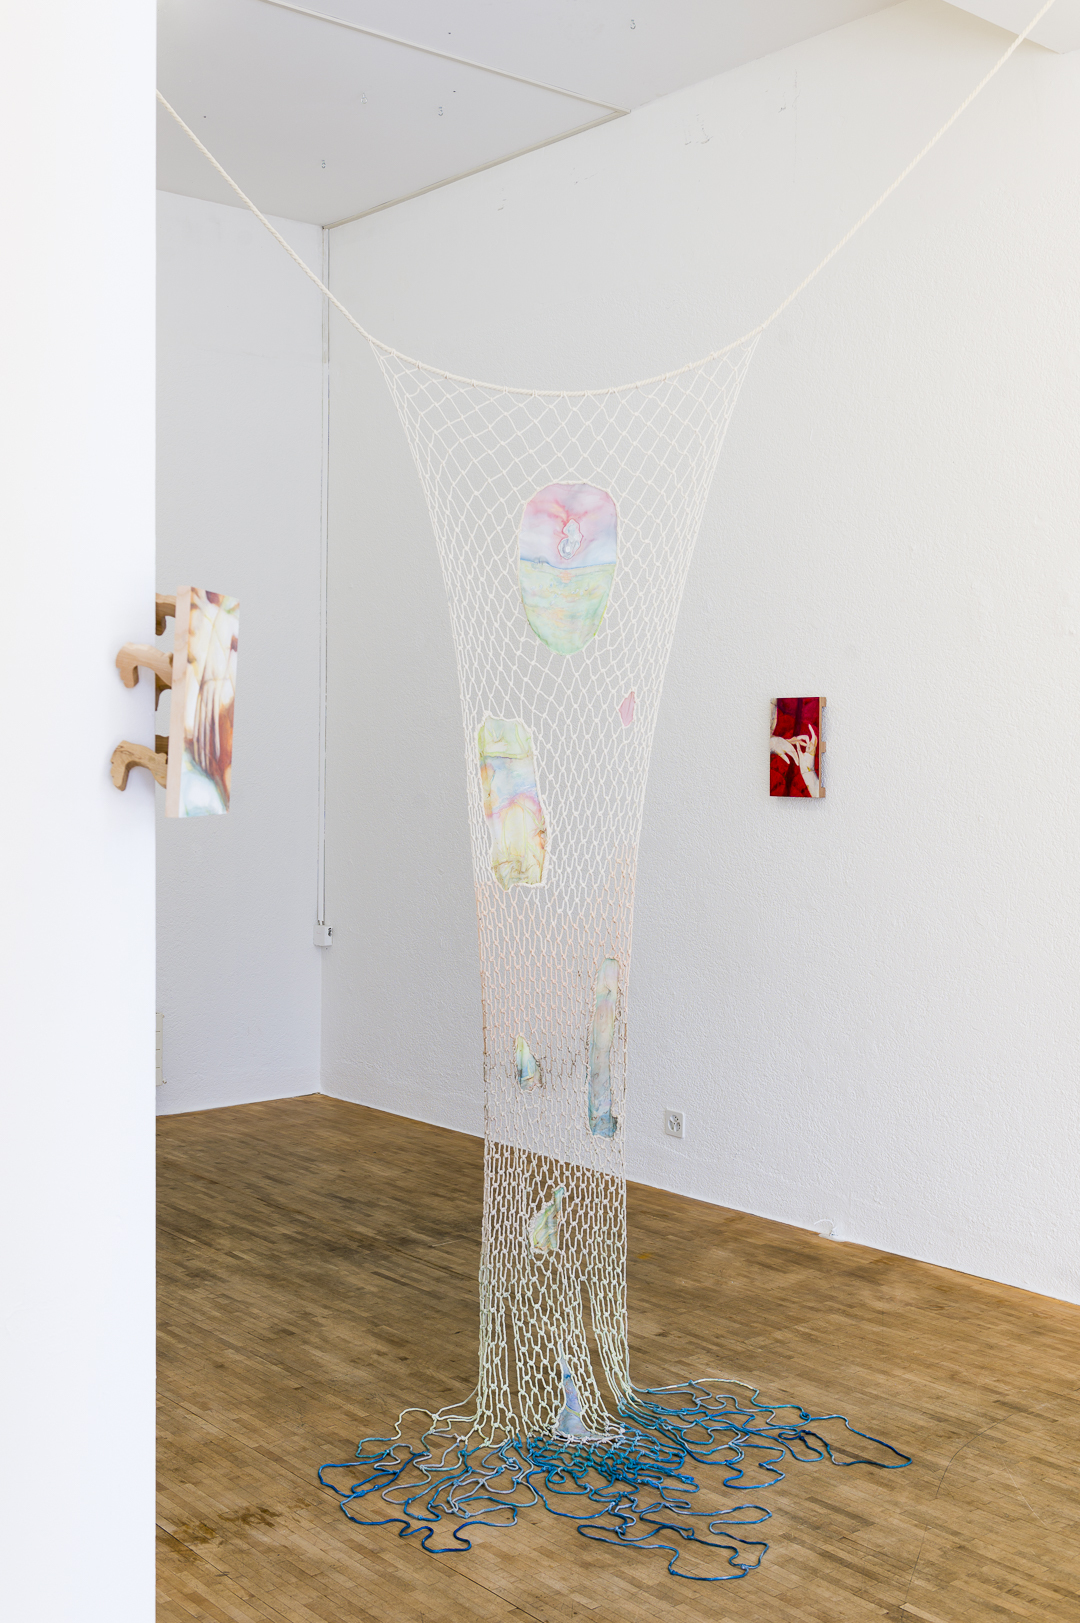 Installation View, Tracing the Ethereal, Parat, Zurich